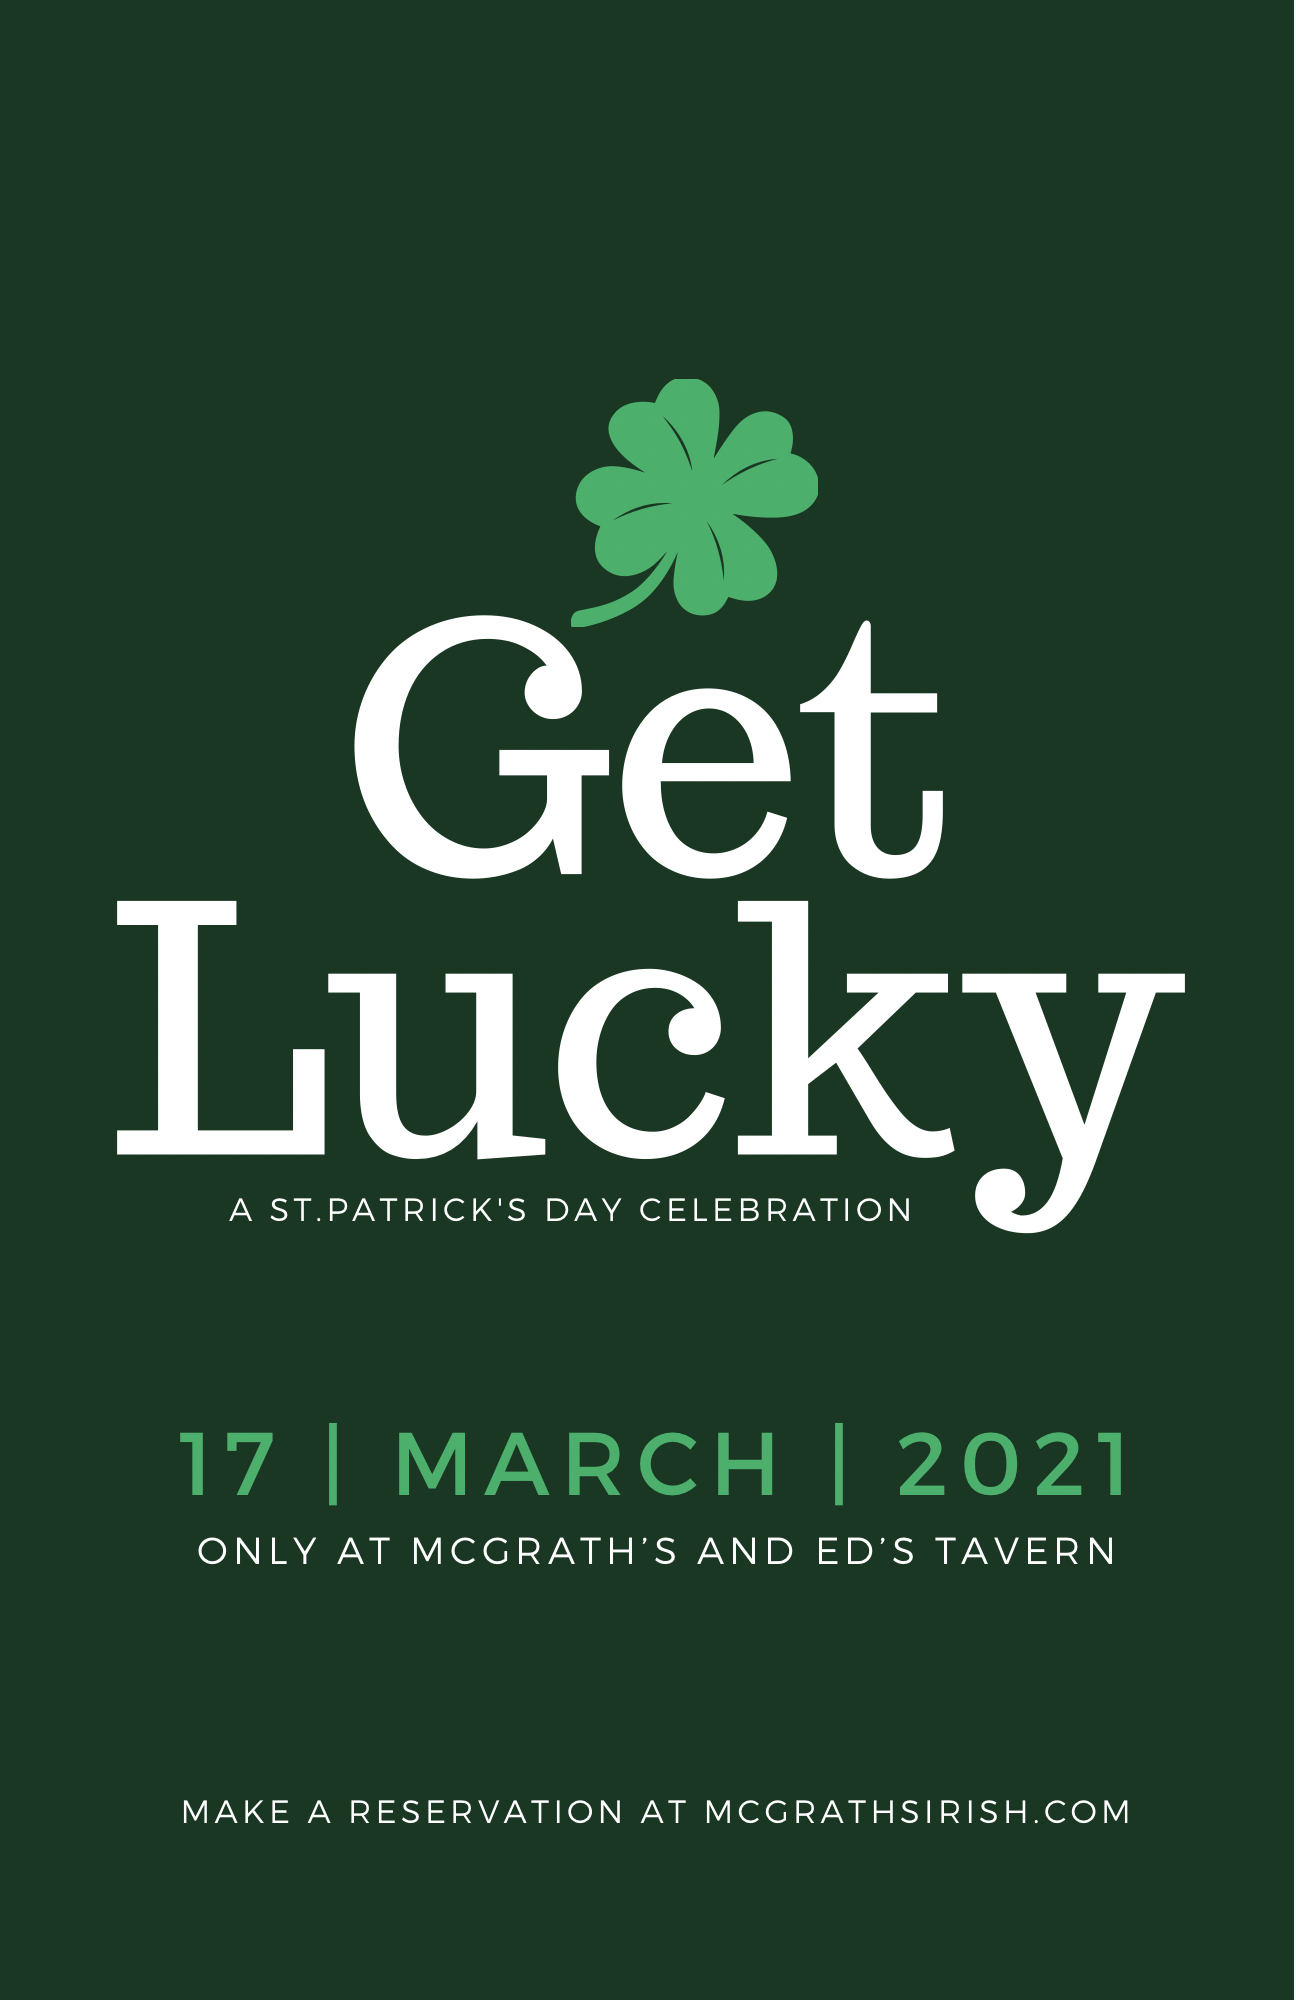 Celebrate St. Patrick’s Day with Us!